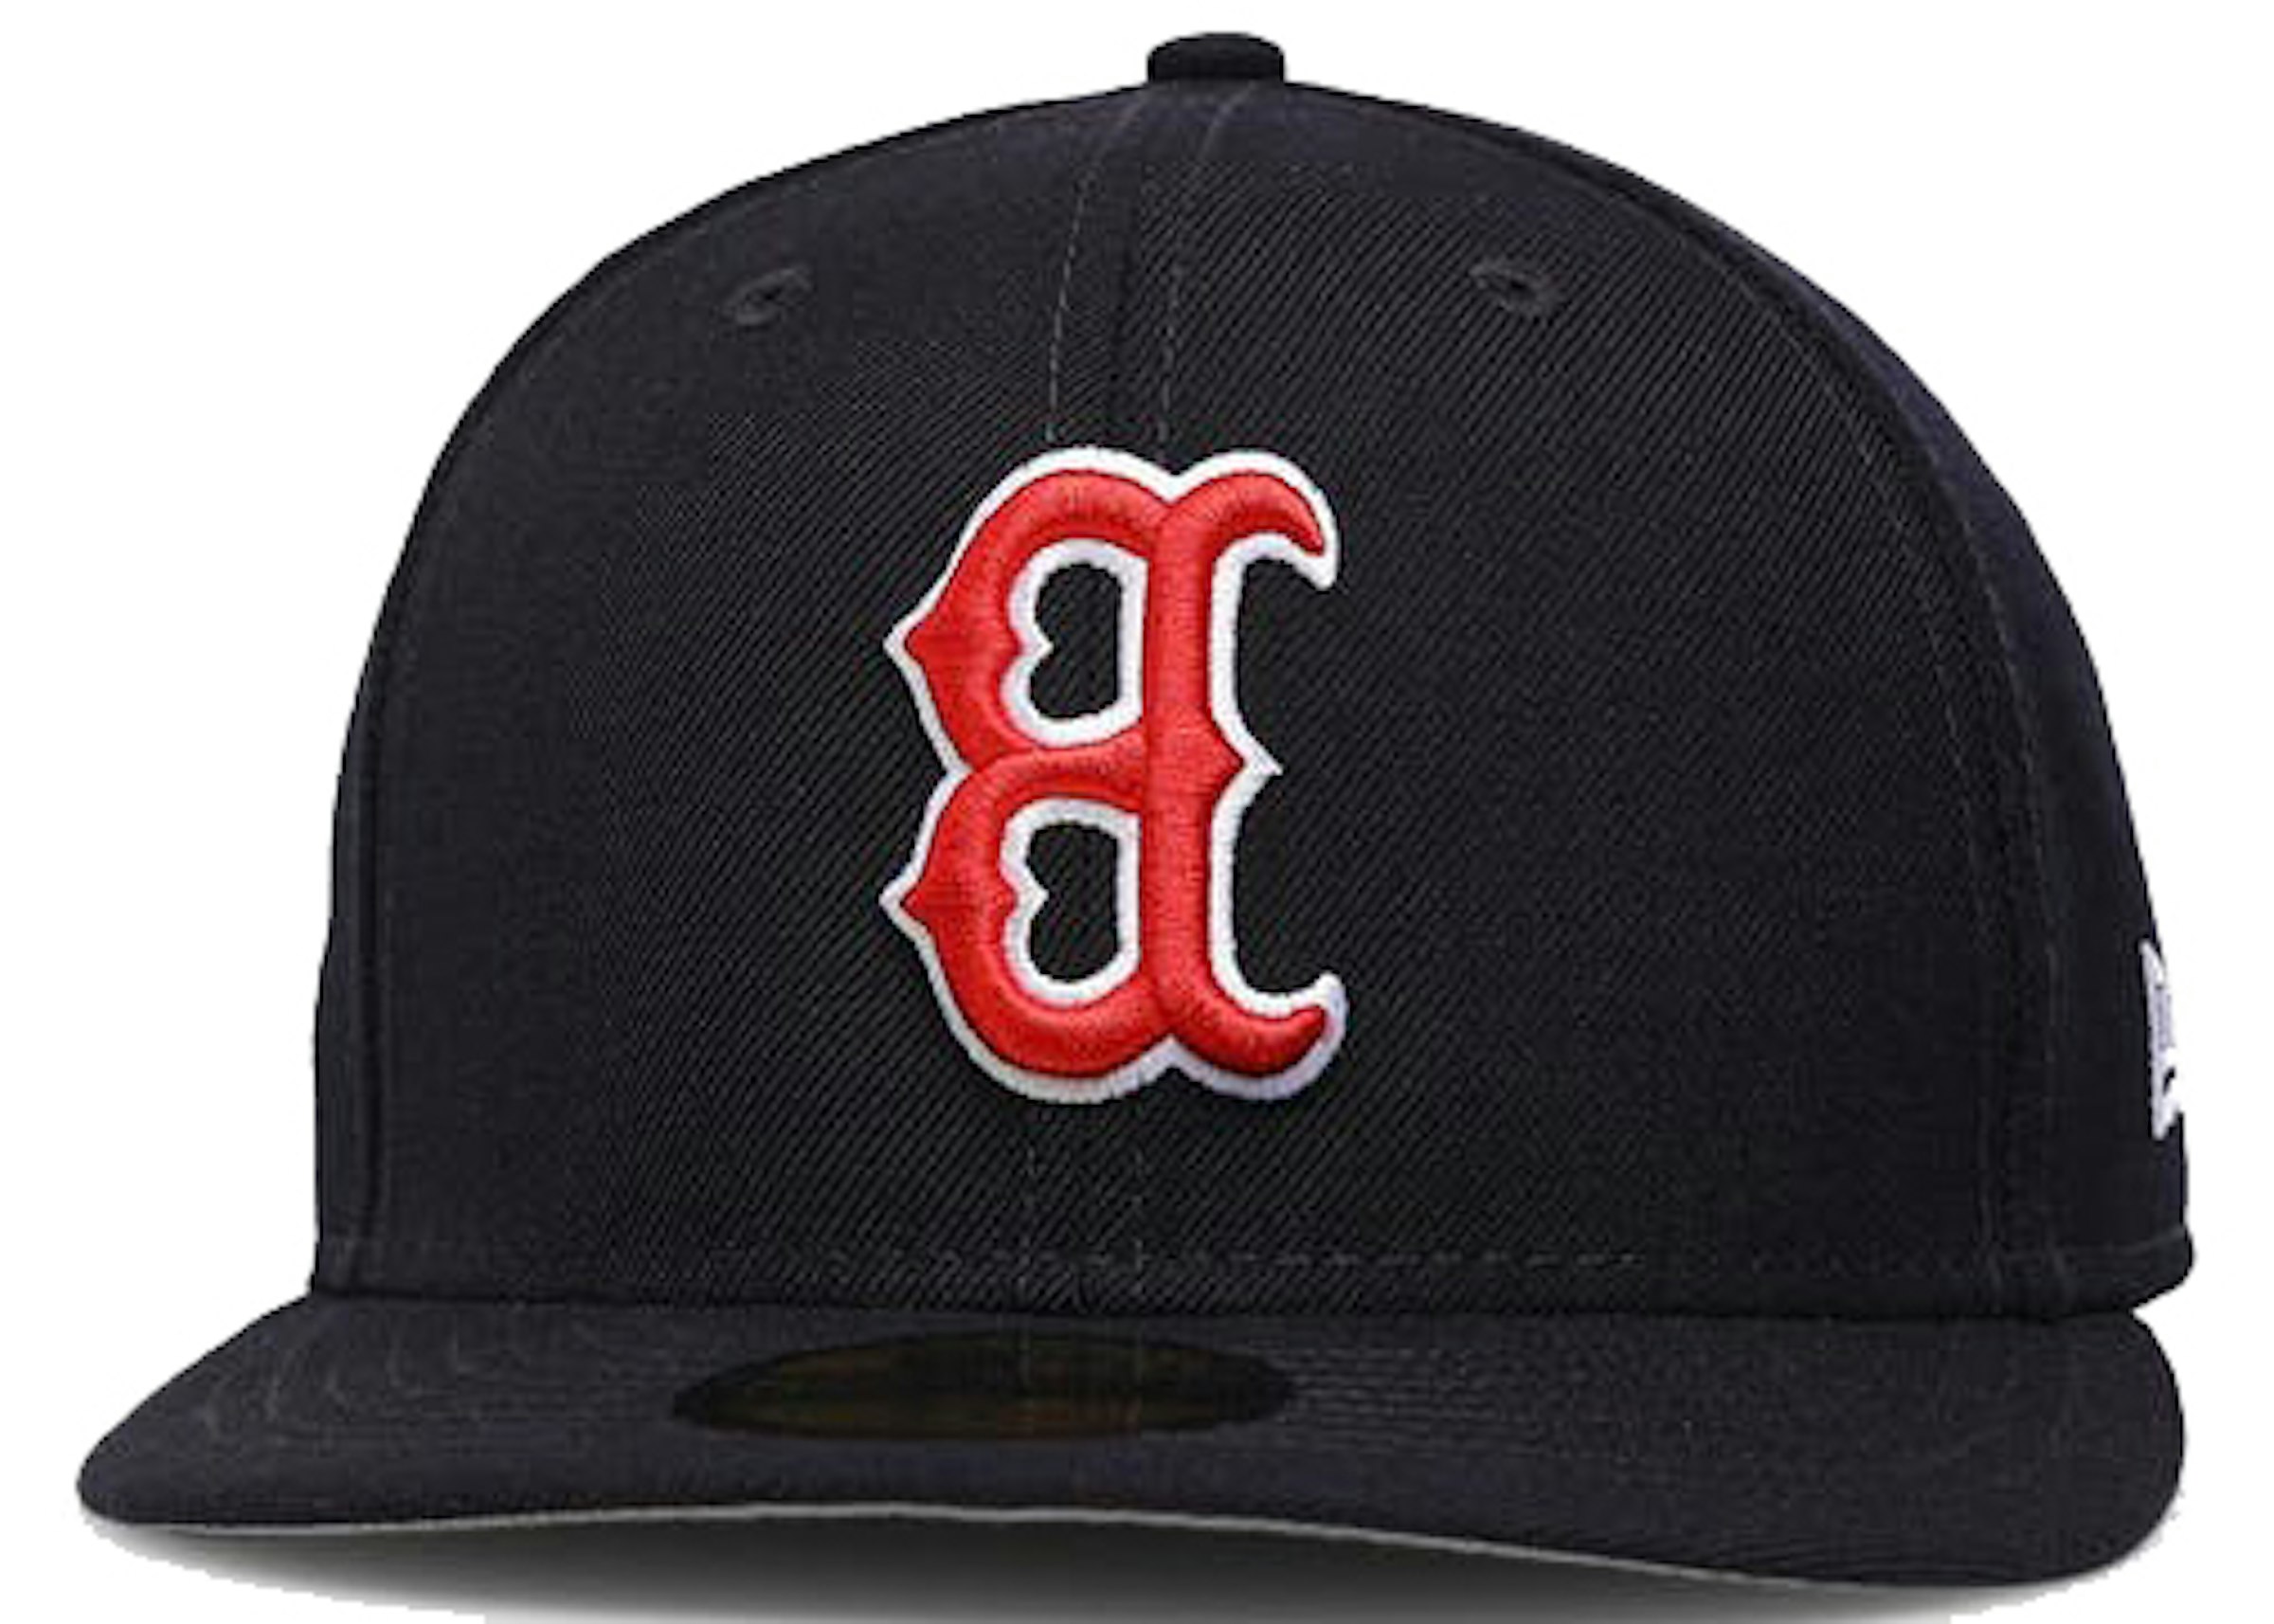 New Red Sox Upside Down Fitted Hat Navy - FW21 Men's - US